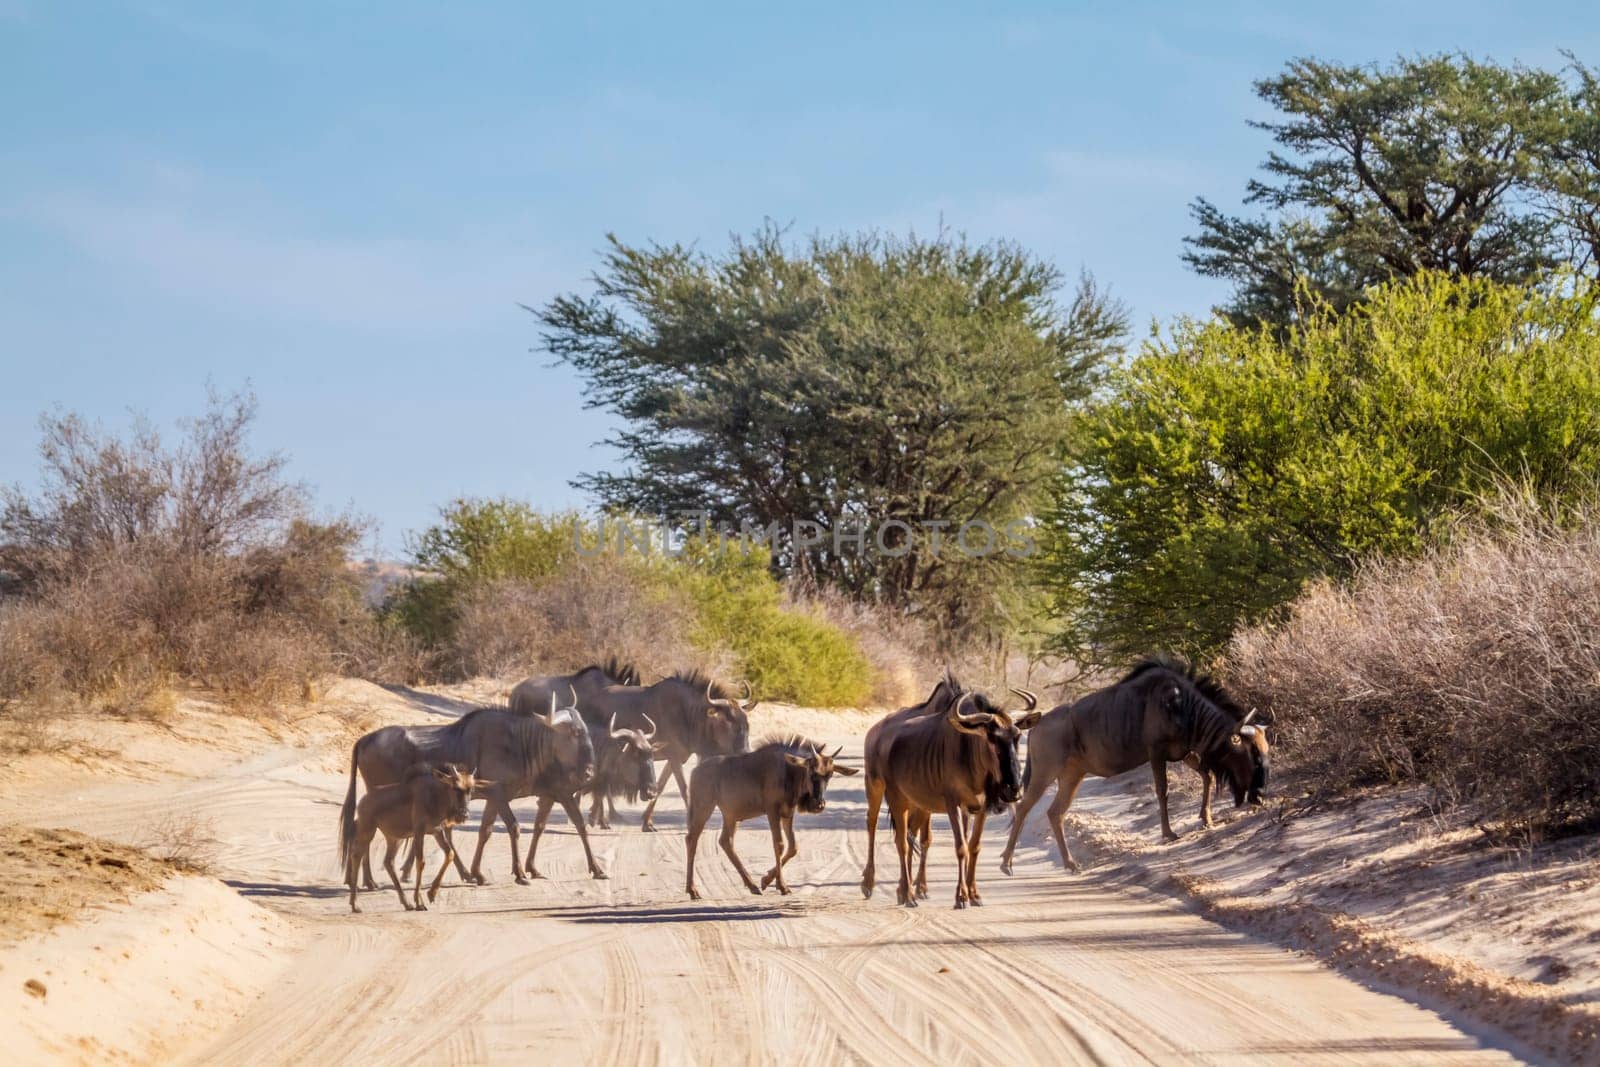 Small group of Blue wildebeest on safari road in Kgalagadi transfrontier park, South Africa ; Specie Connochaetes taurinus family of Bovidae